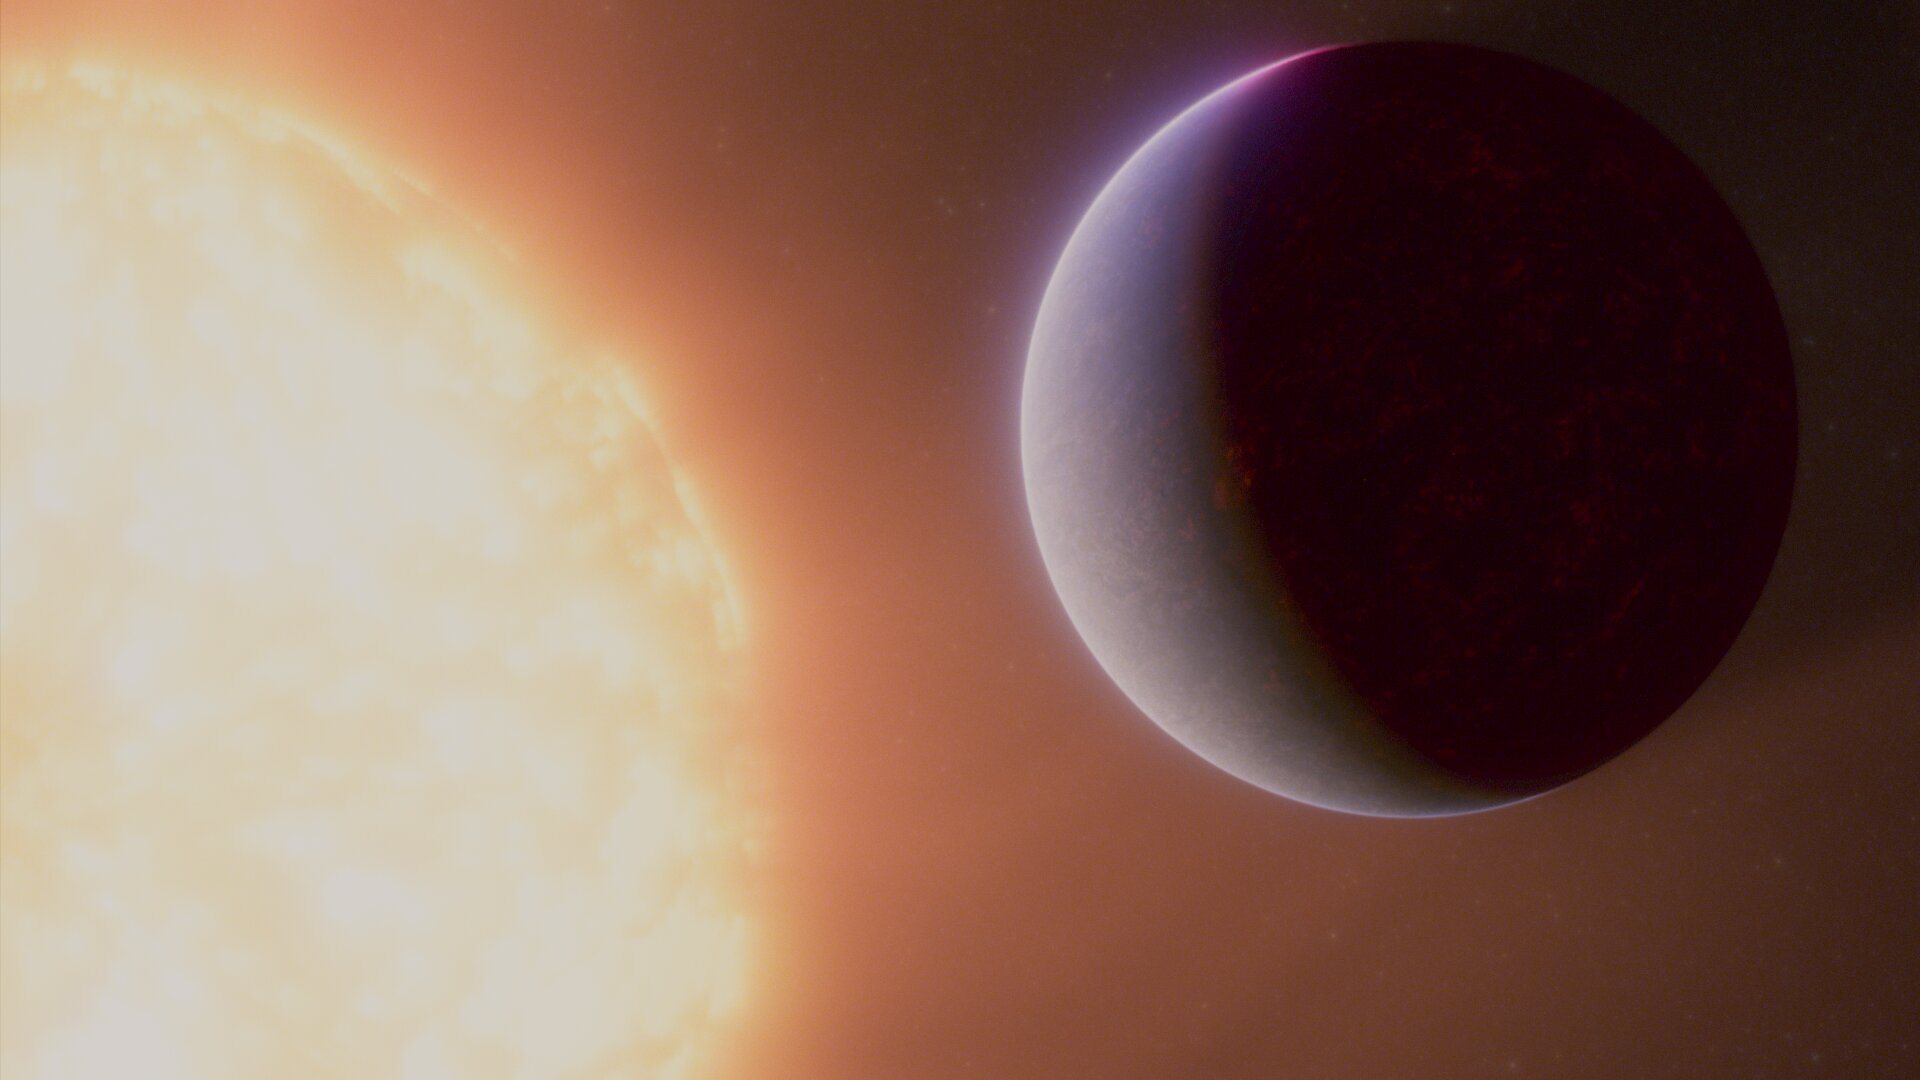 Hints of a possible atmosphere around a rocky exoplanet